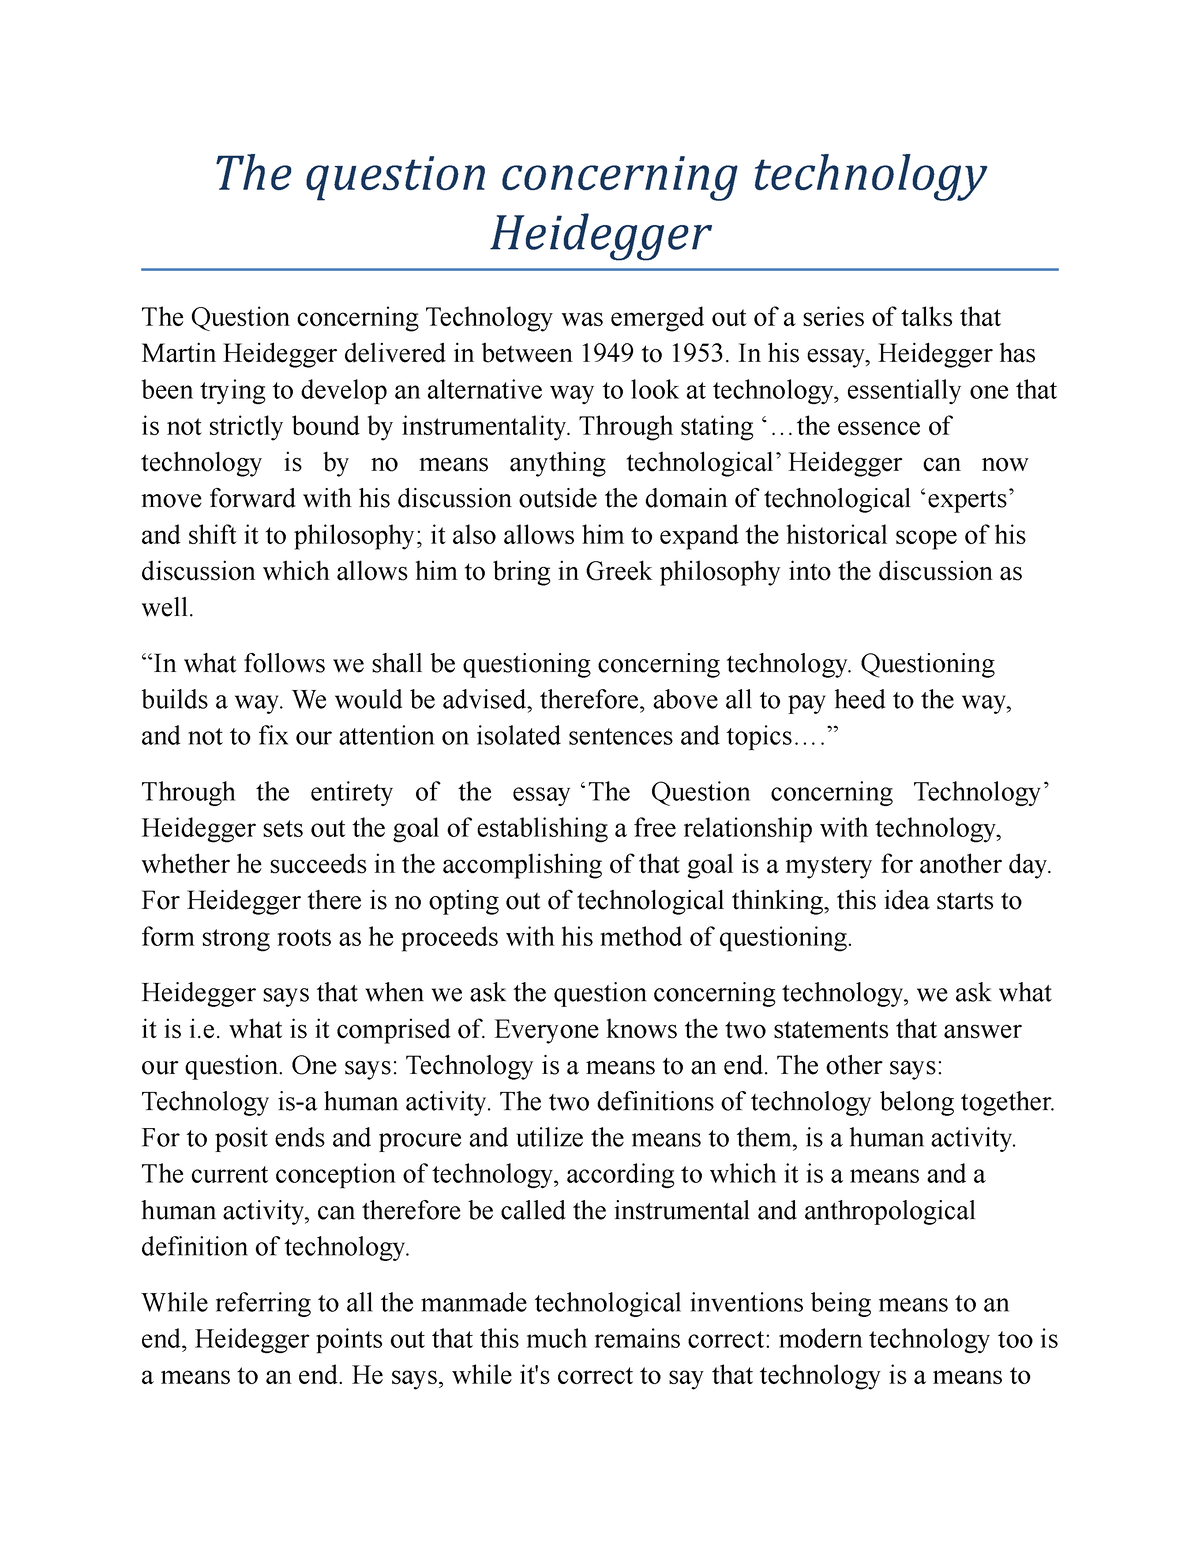 the essay entitled the question concerning technology seeks about